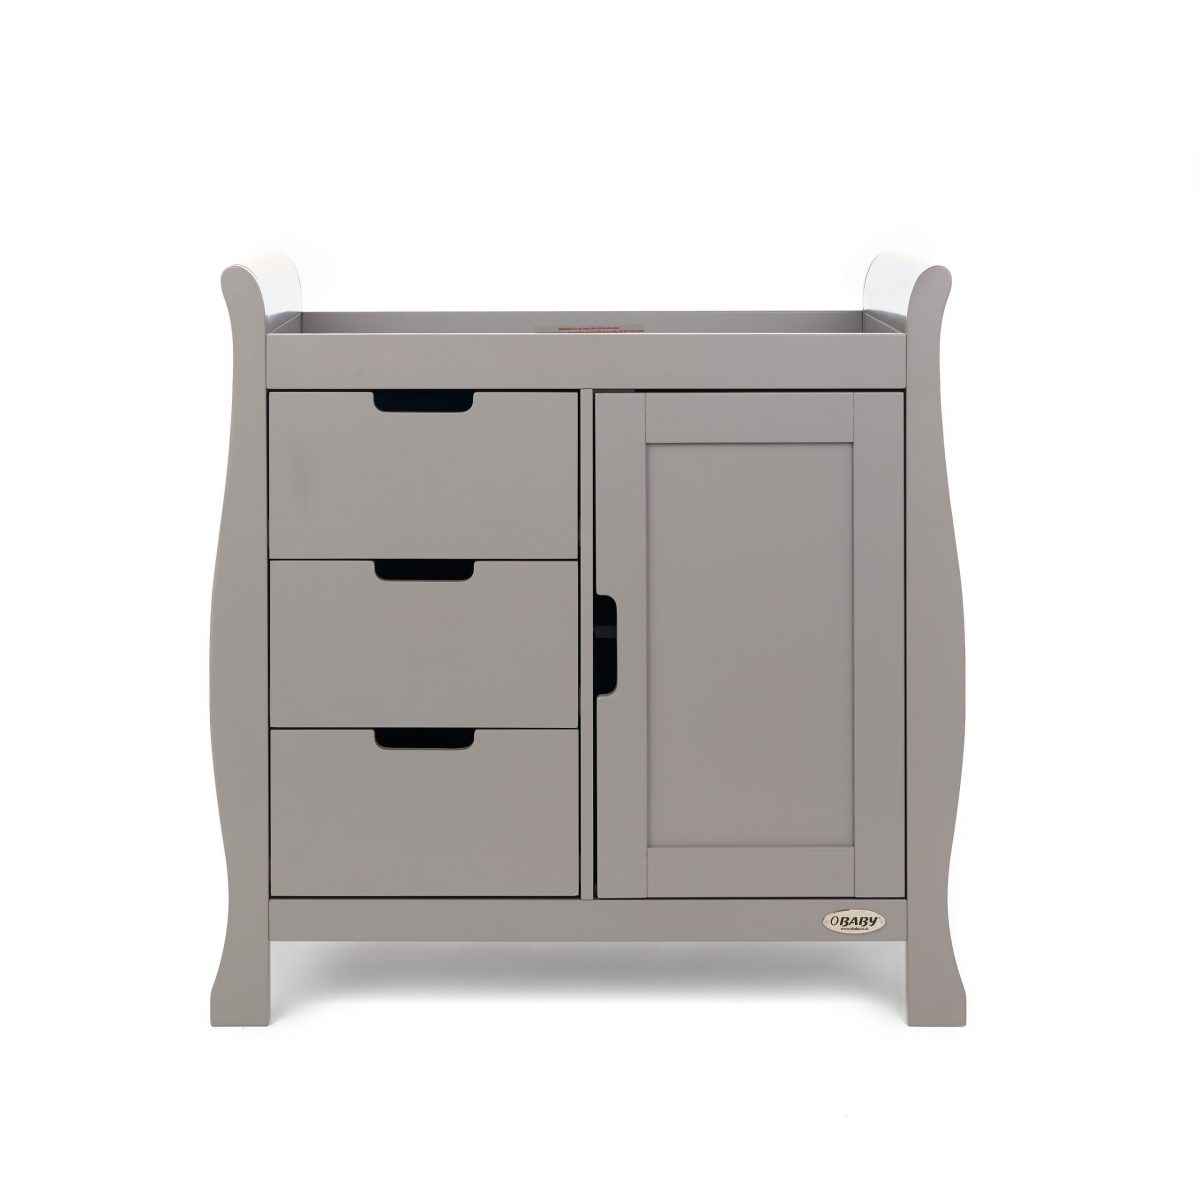 Stamford Classic Sleigh 2 Piece Room Set-Taupe Grey